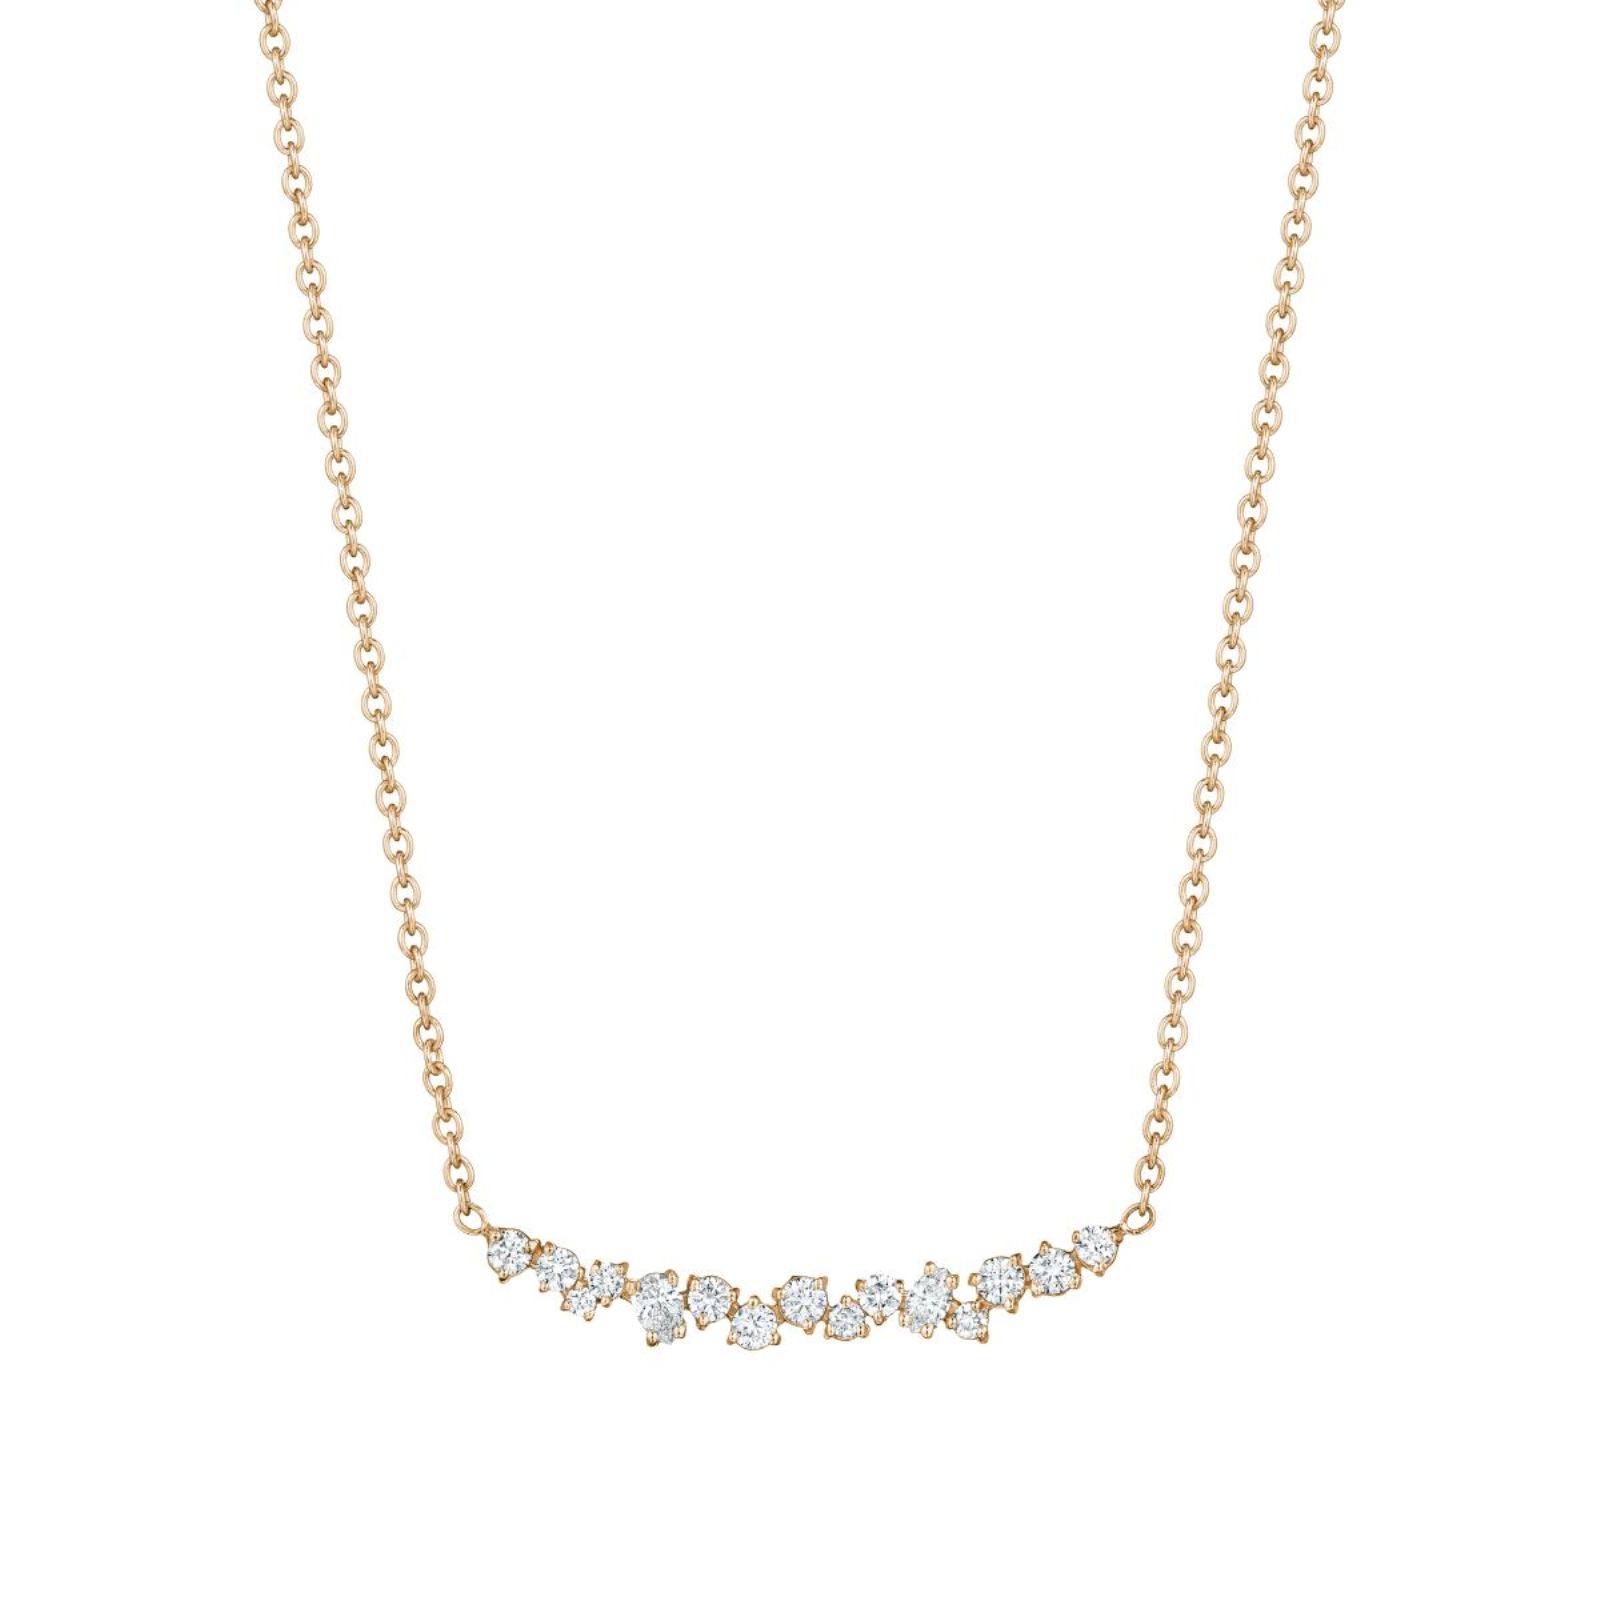 GOLD CURVED CLUSTER DIAMOND NECKLACE